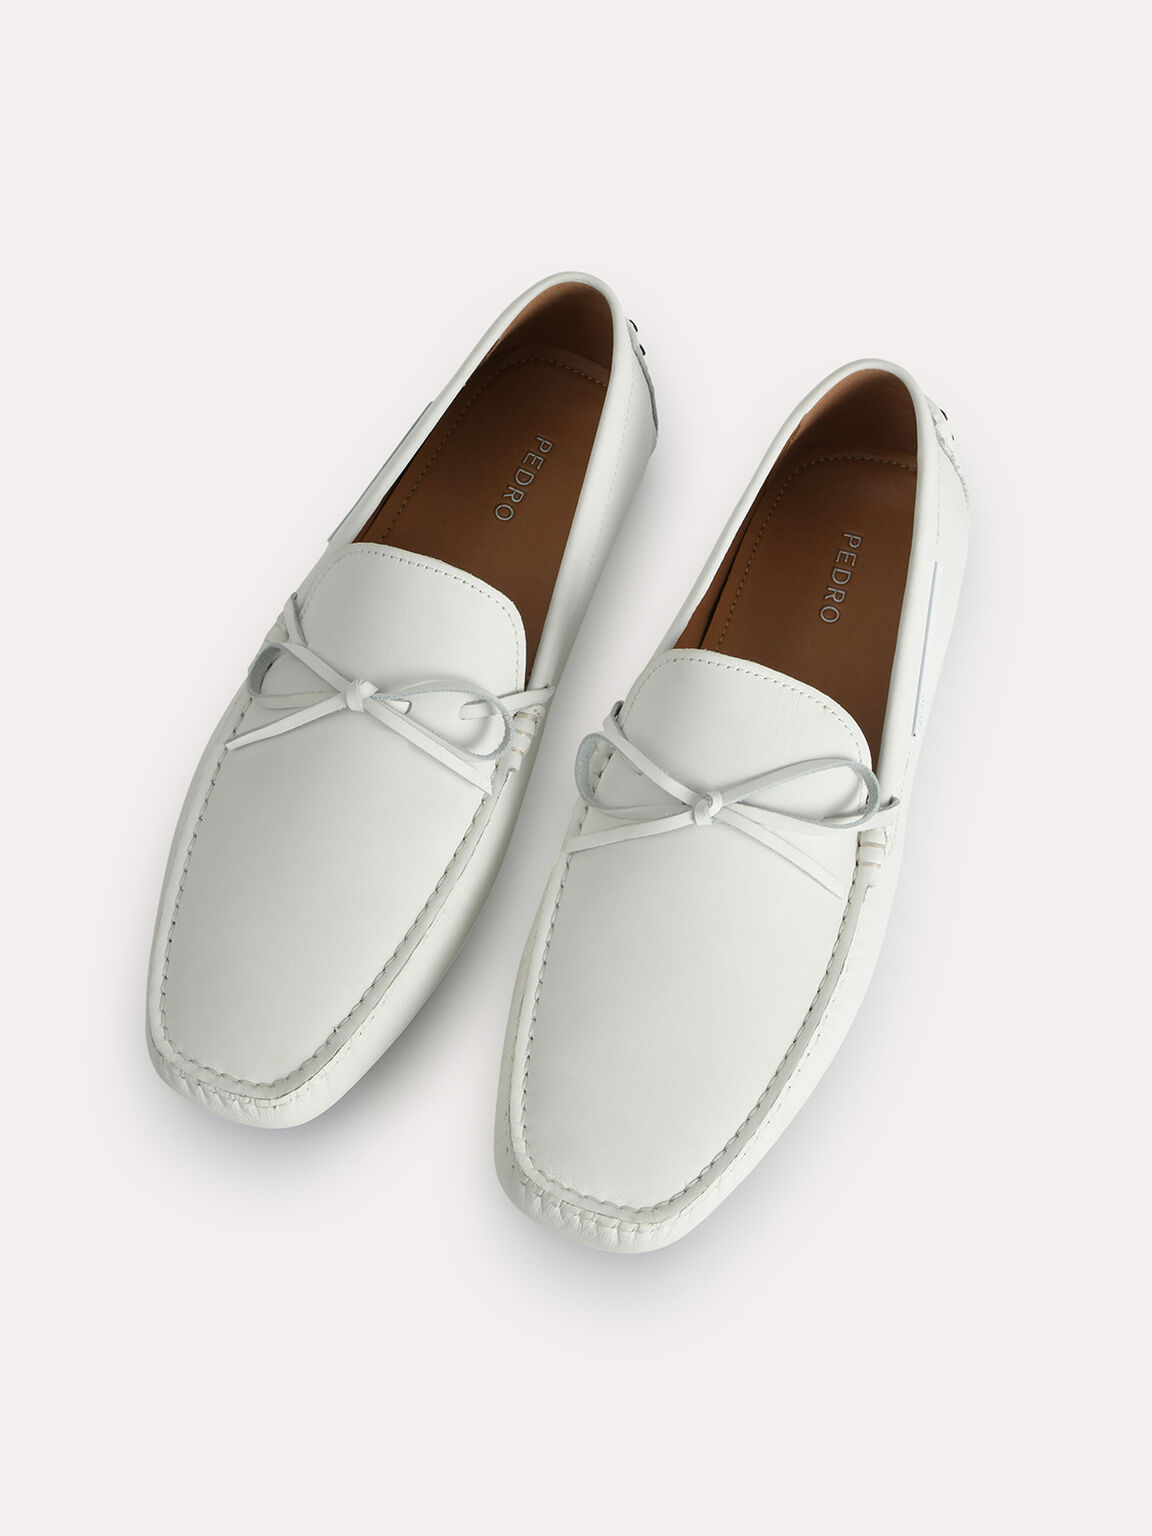 Leather Moccasins with Bow Detailing, White, hi-res